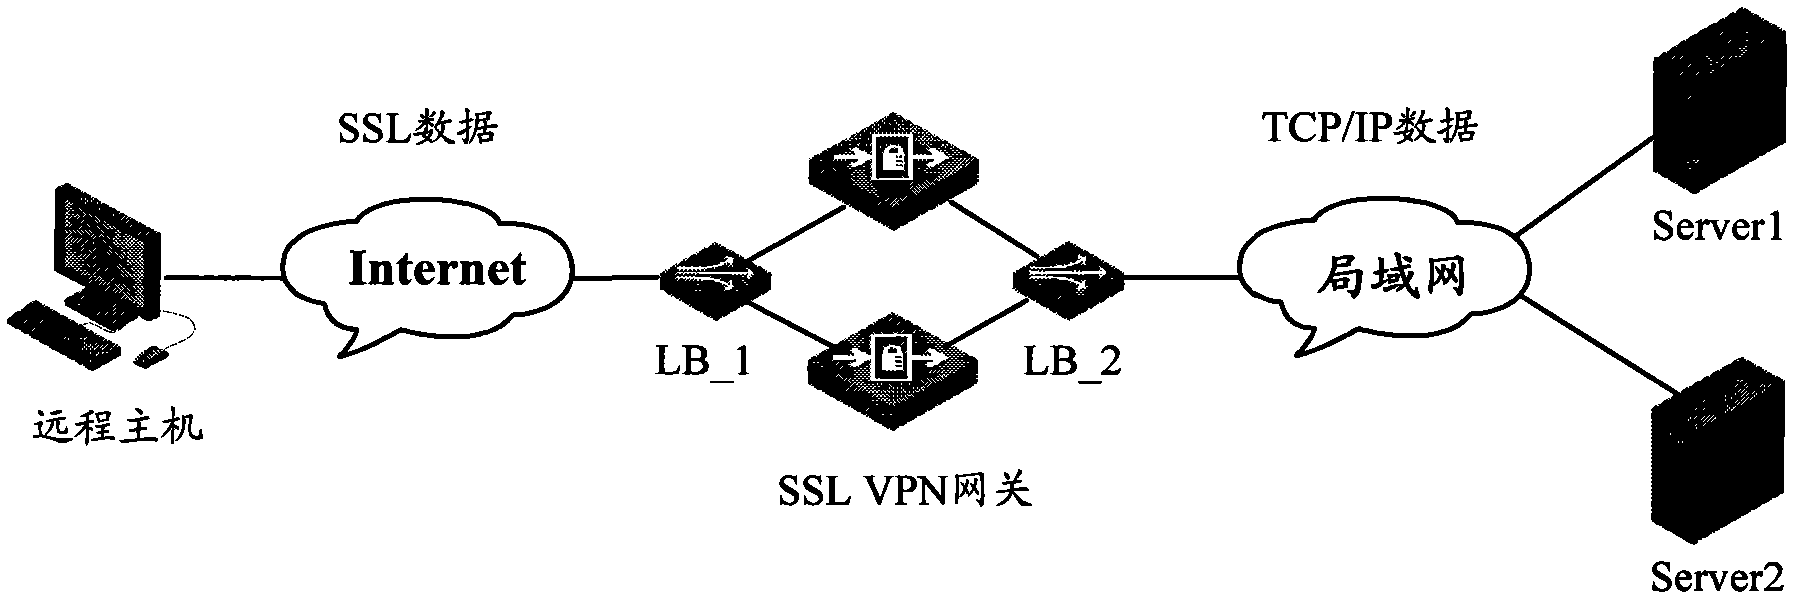 User access method and device based on SSL (Secure Socket Layer) VPN (Virtual Private Network) gateway cluster